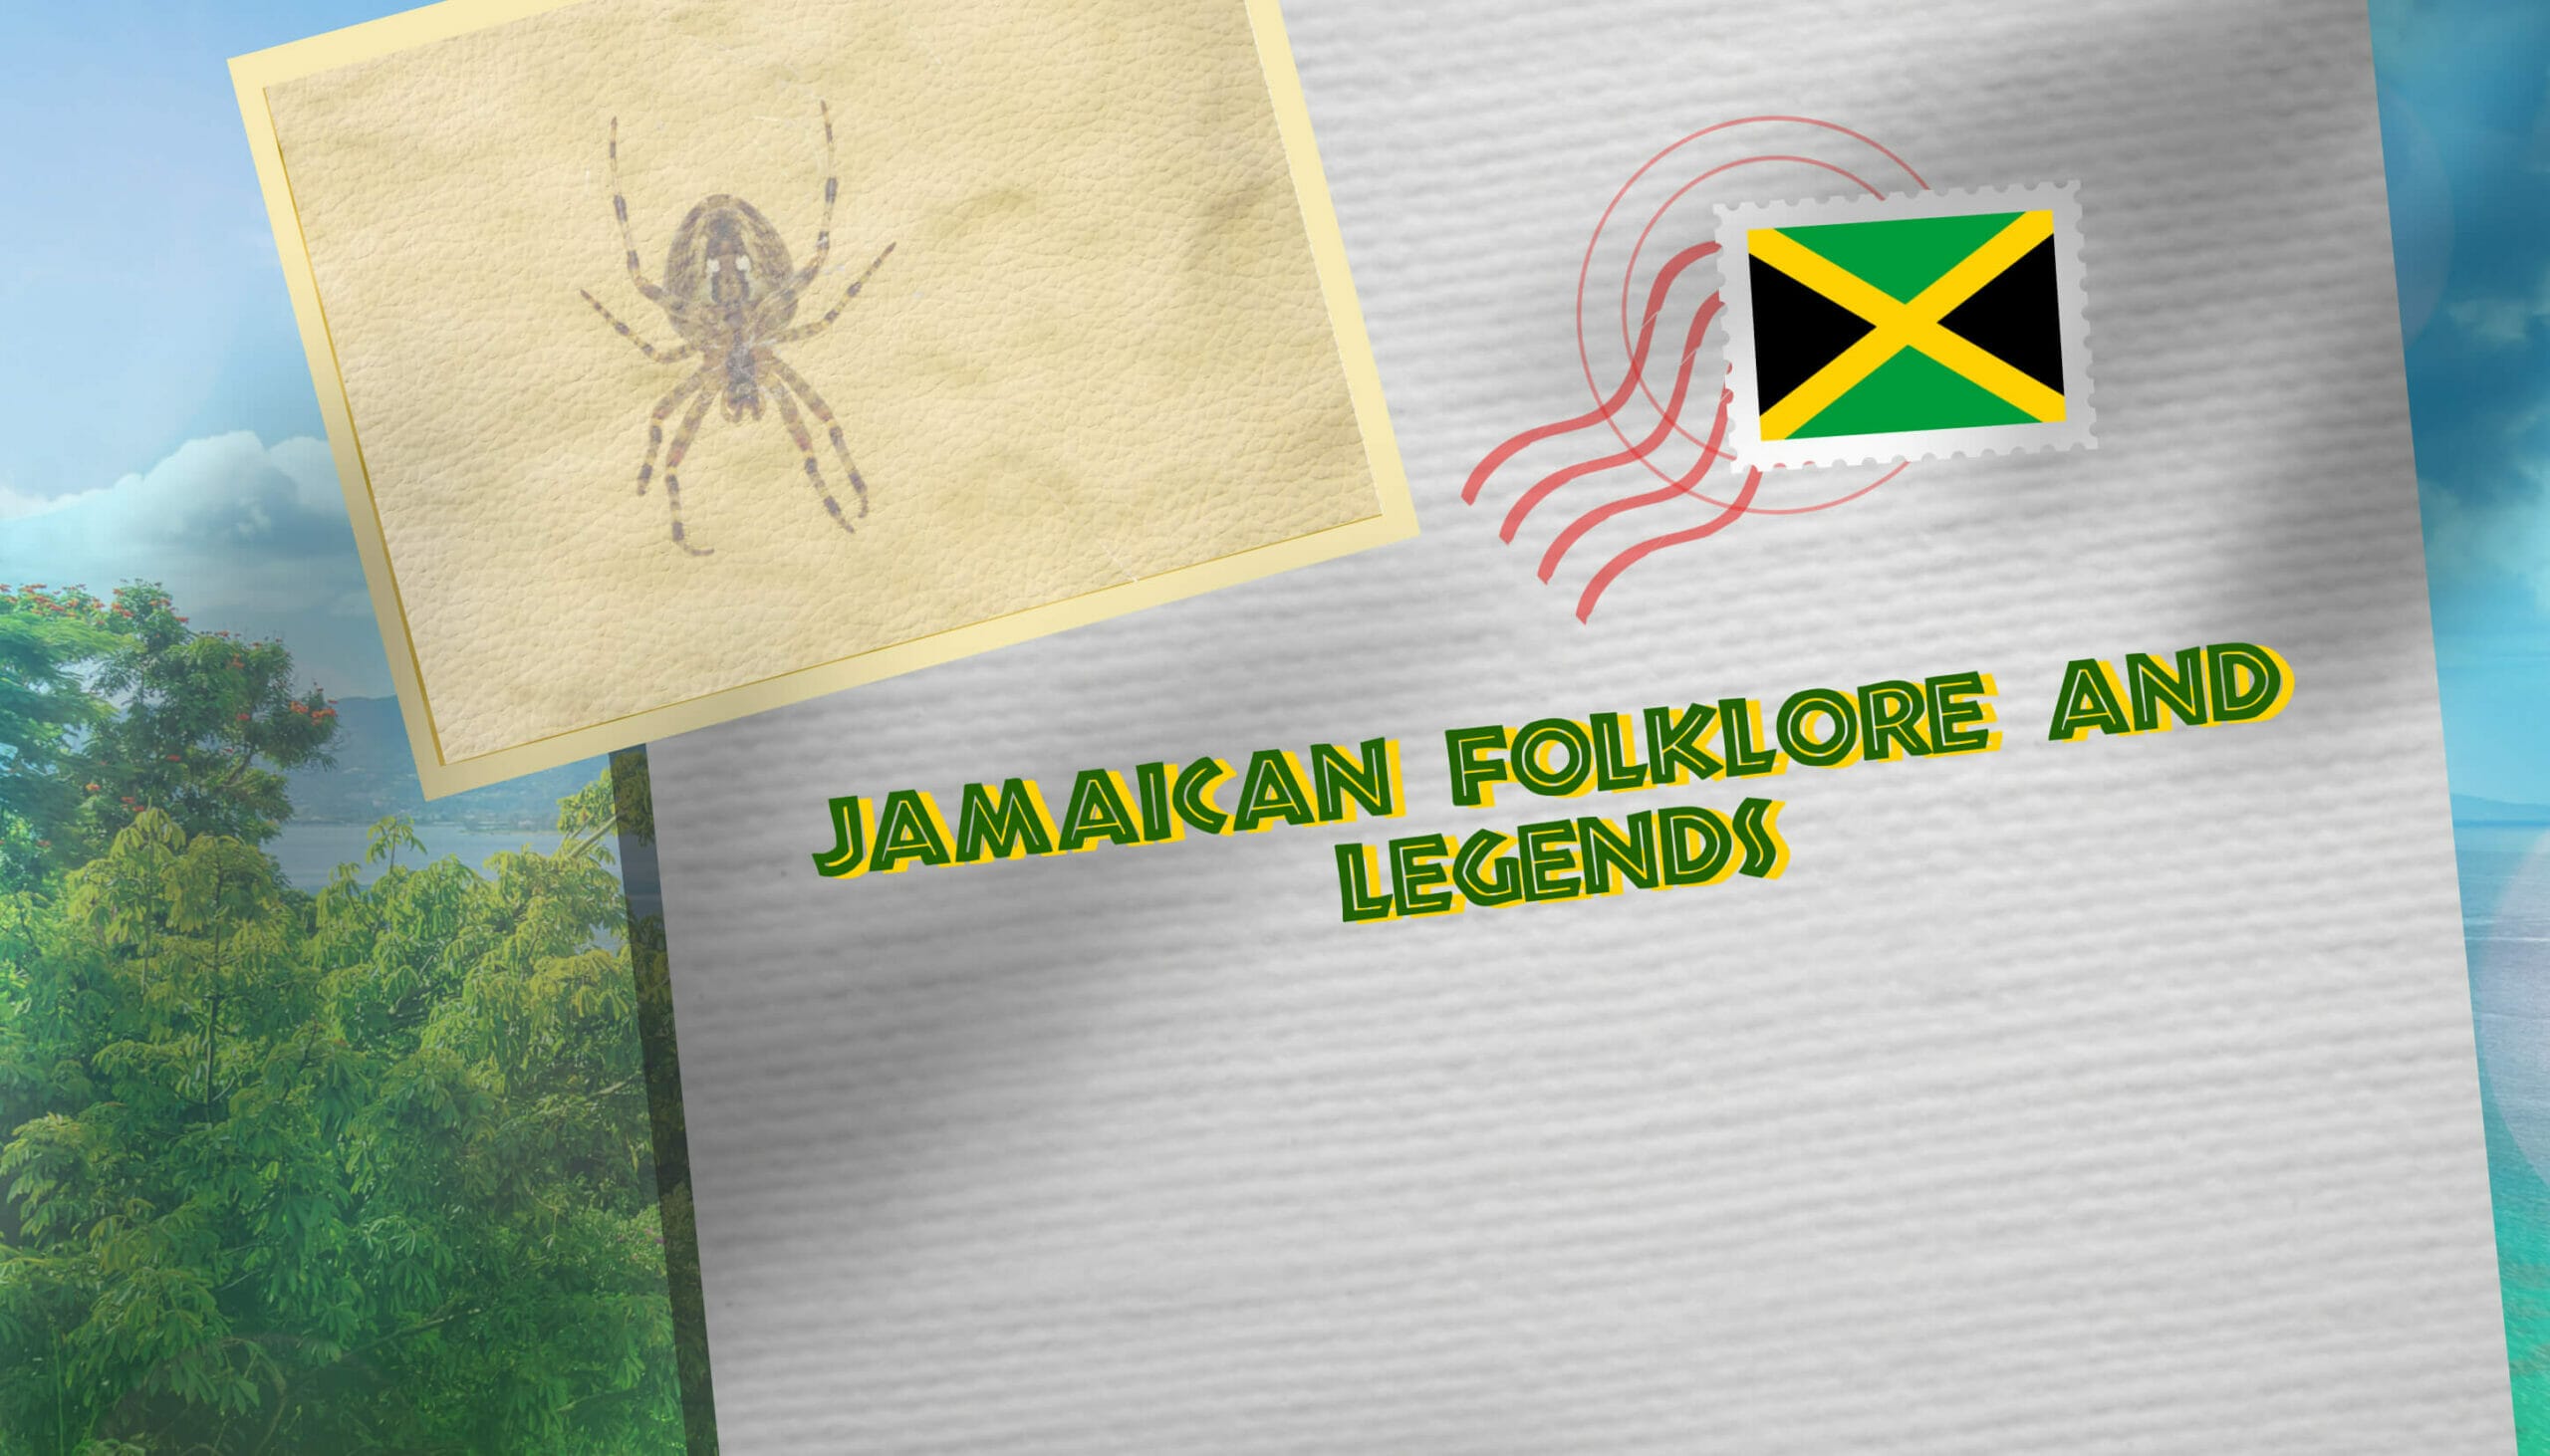 Jamaican Folklore and Legends